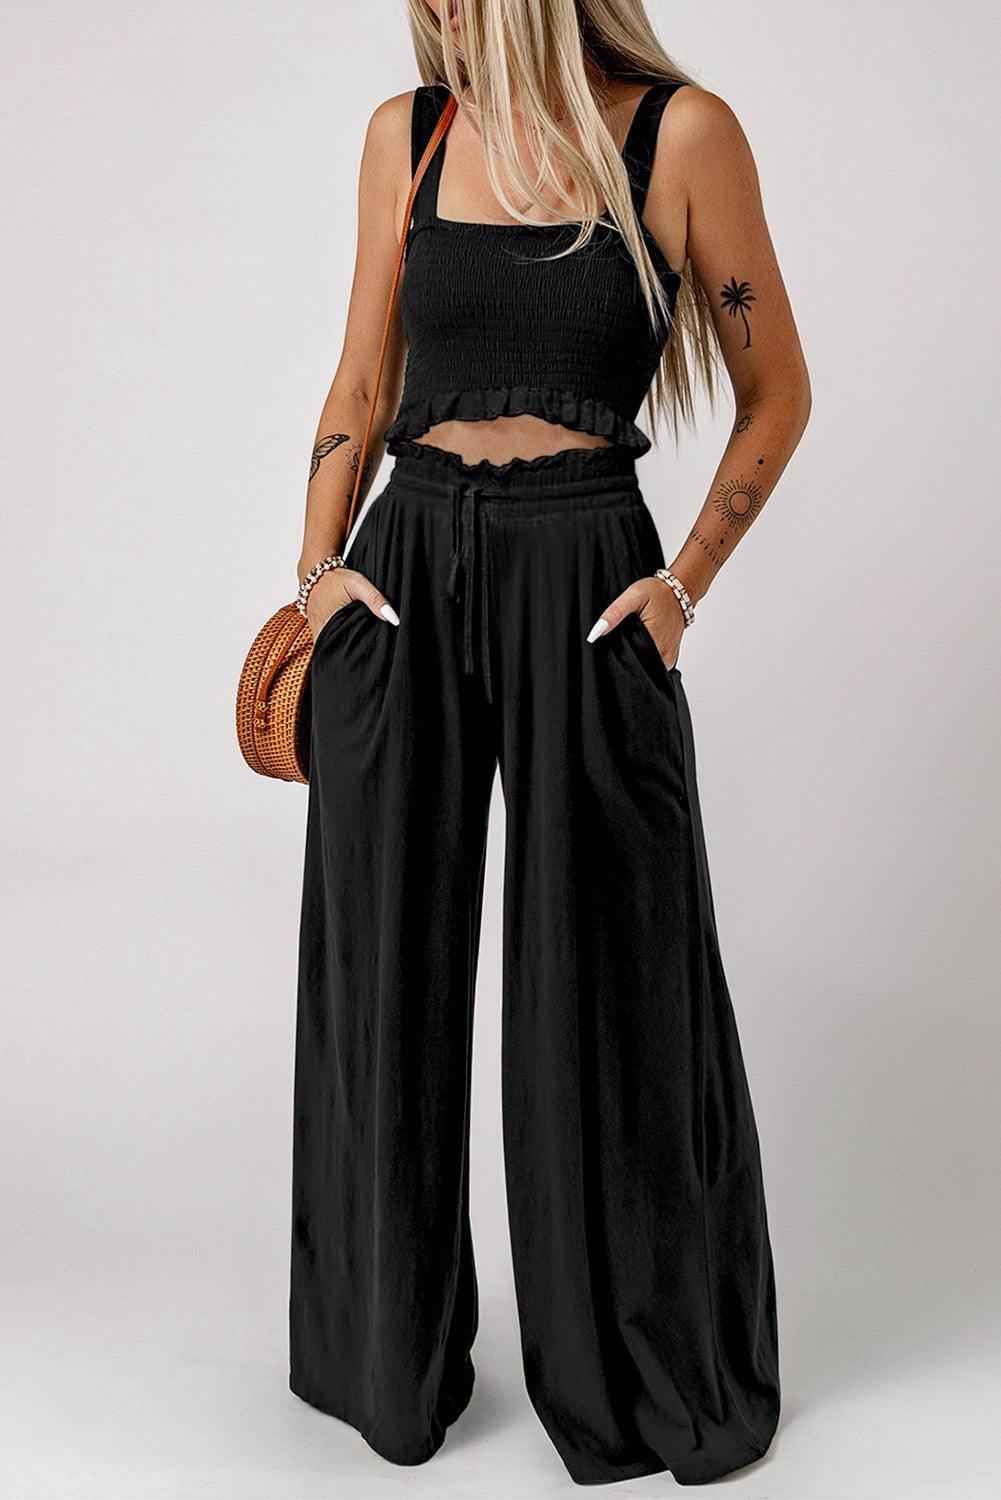 Square Neck Cropped Tank Top and Long Pants Set - Vesteeto